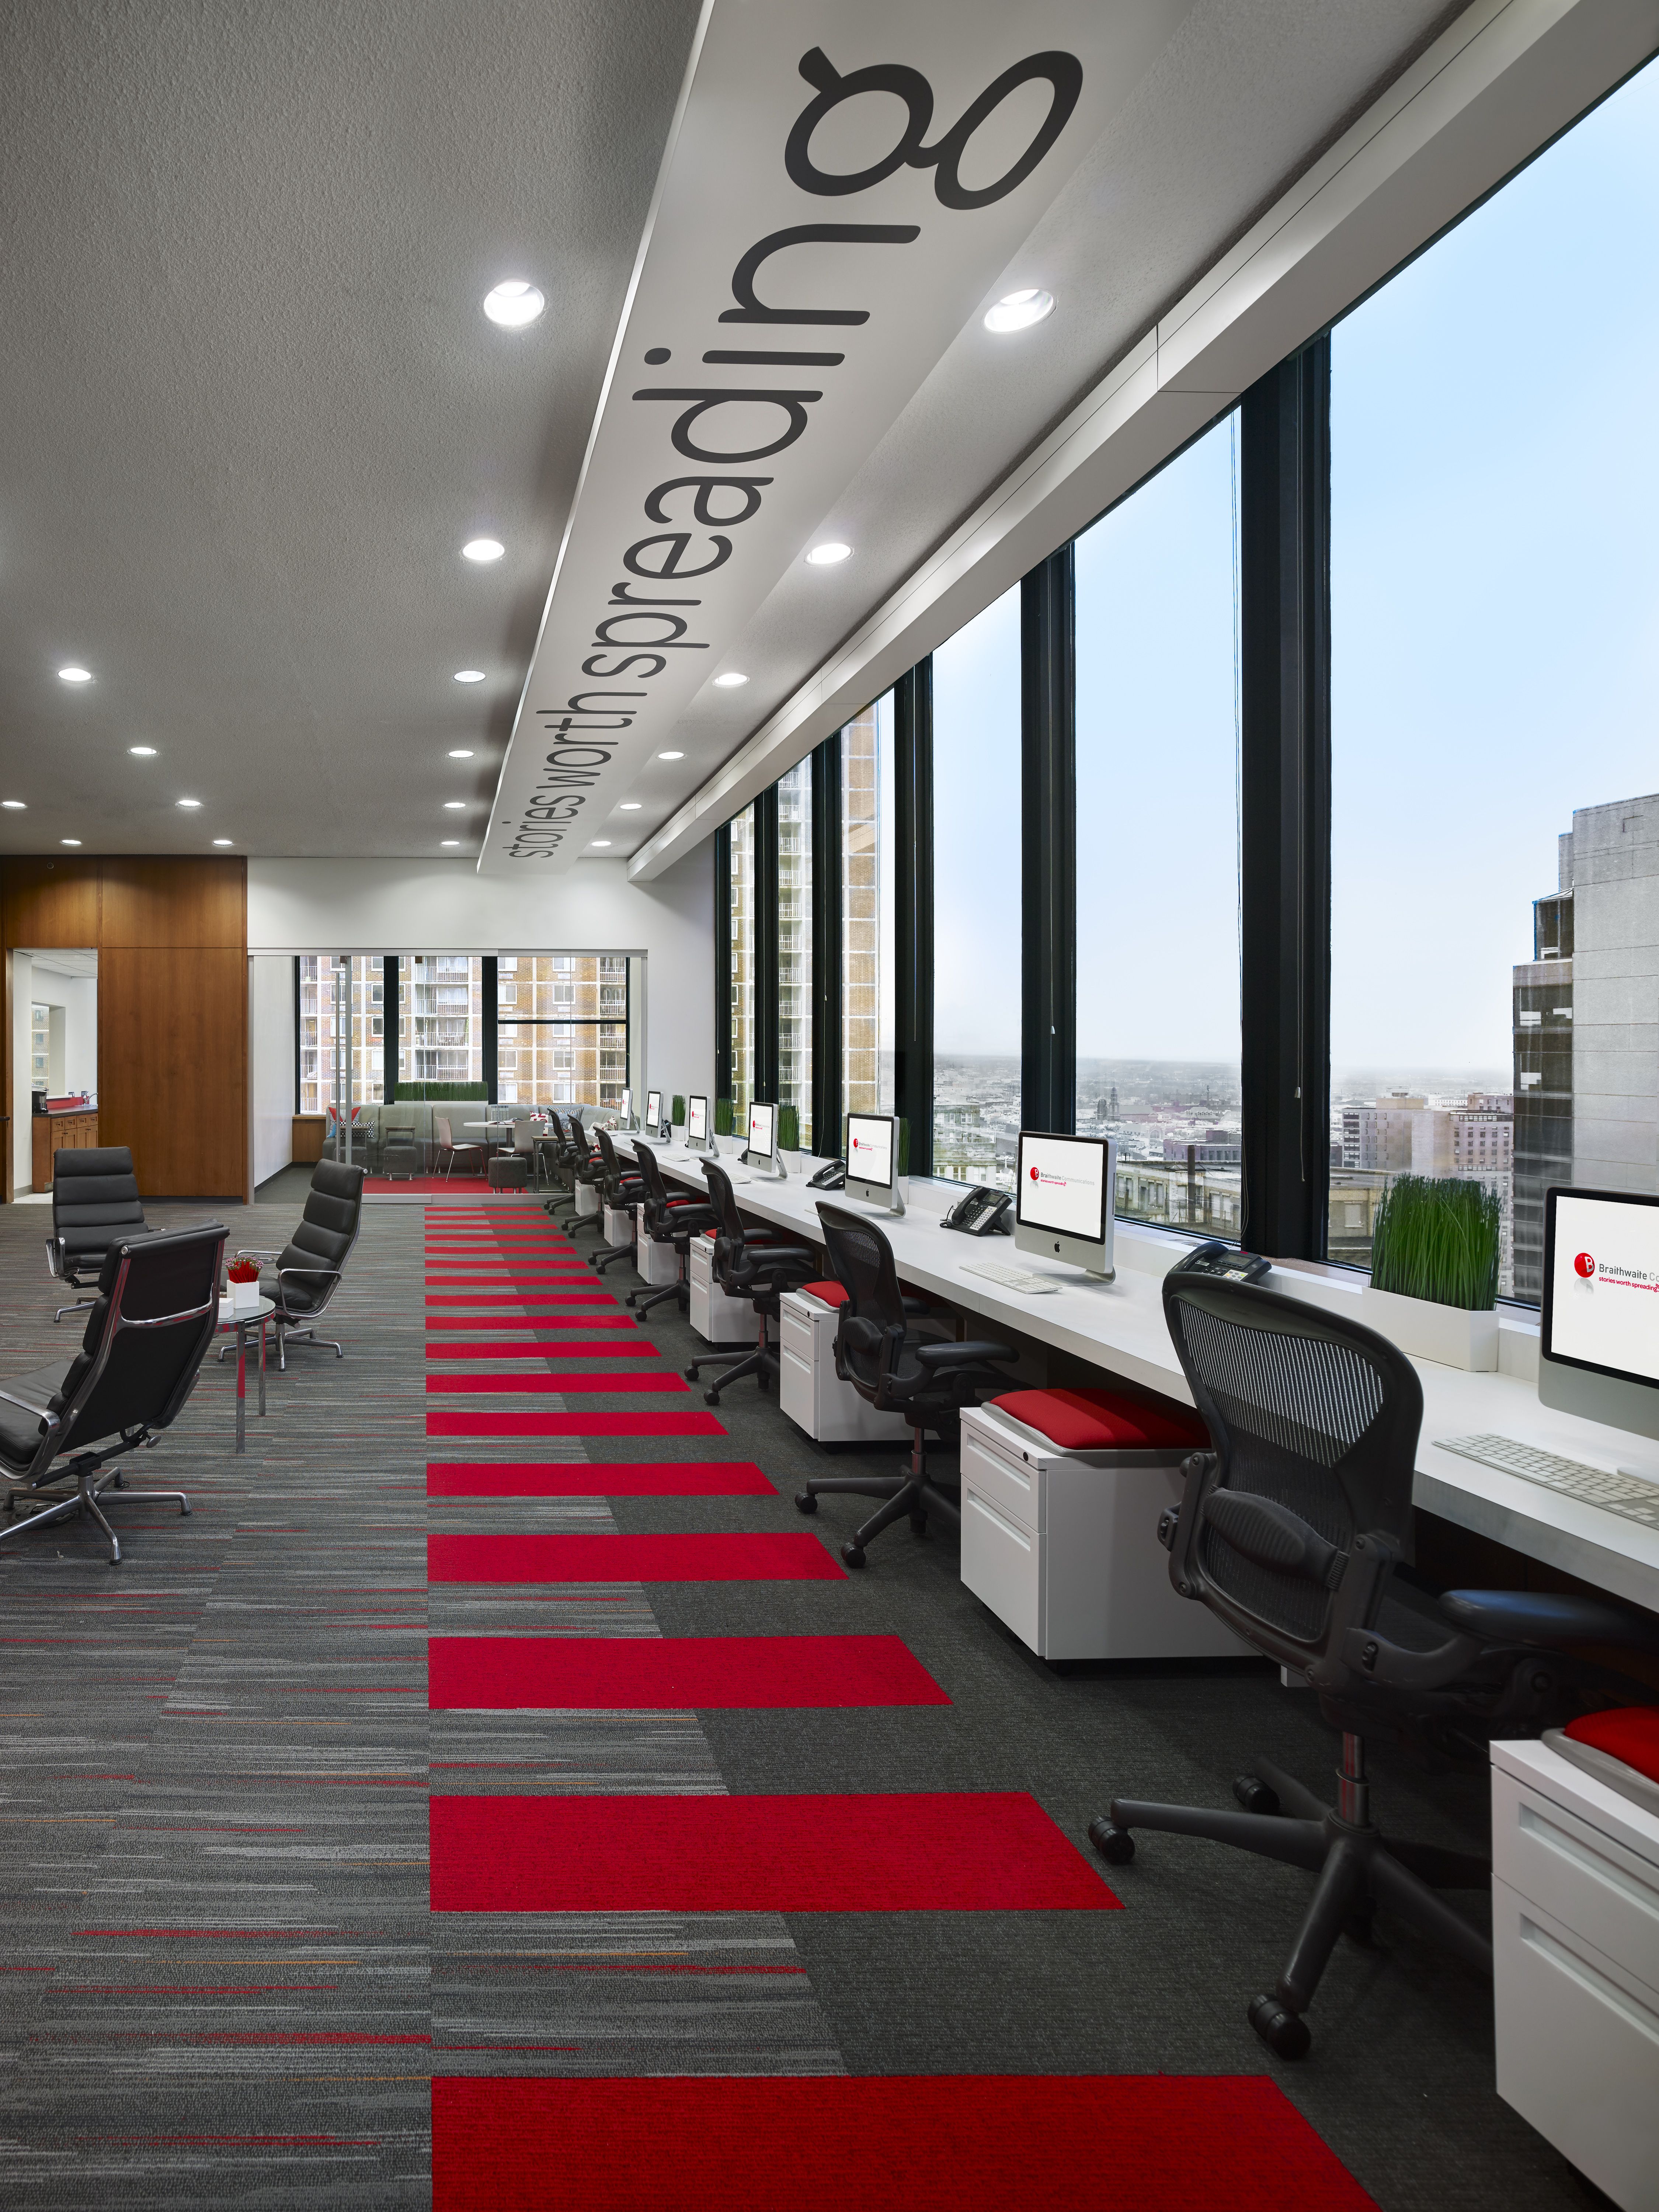 A long wall of bright modern workstations look out on floor to ceiling glass windows